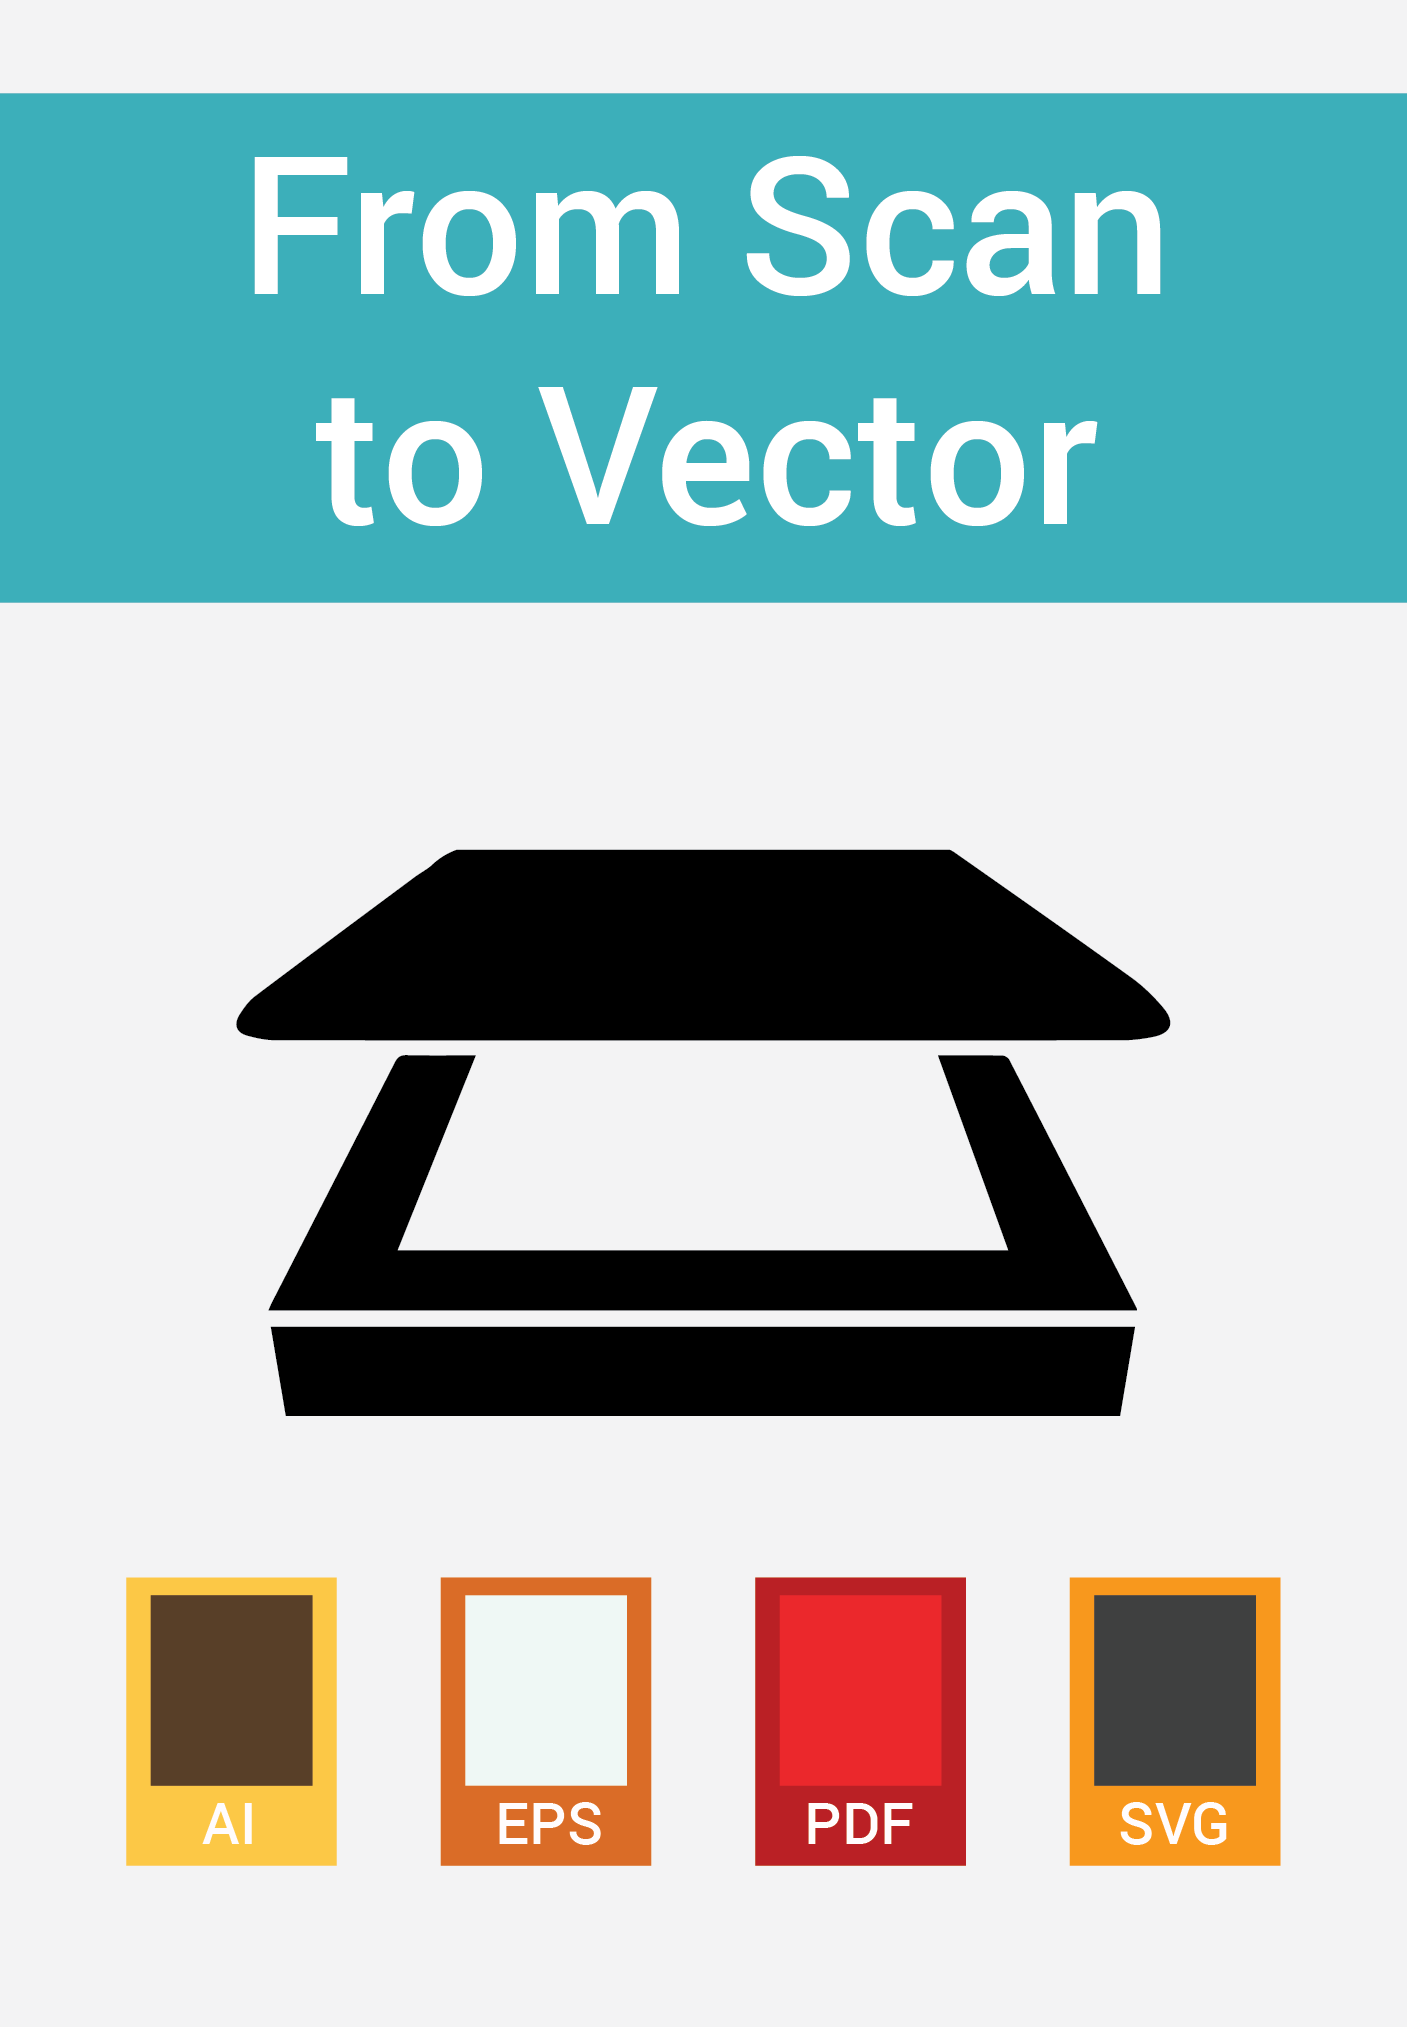 VECTORIZE SCANNED IMAGES FOR HIGH QUALITY PRINTING